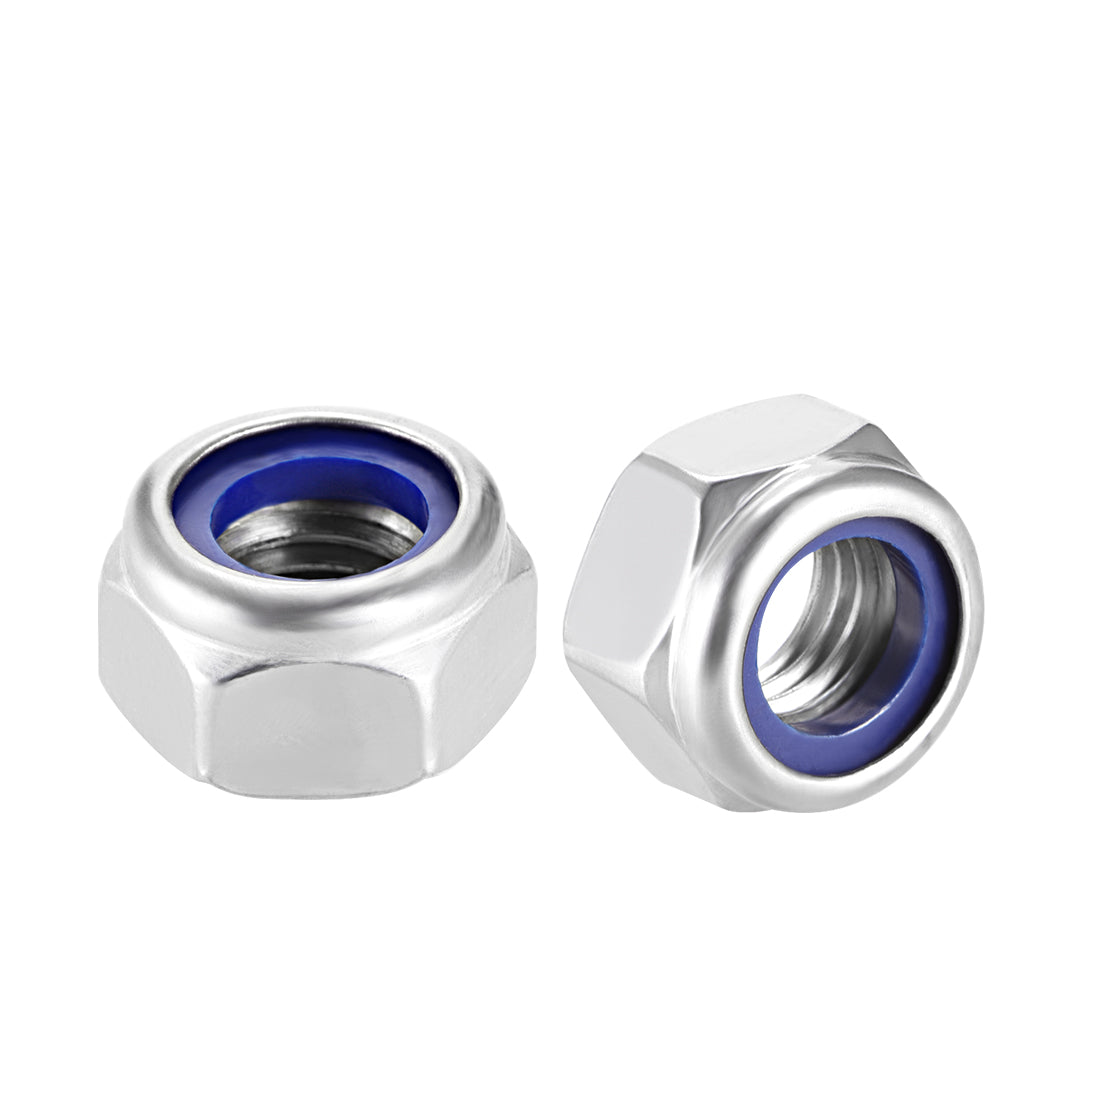 uxcell Uxcell M14x2mm Hex Lock Nuts Stainless Steel Nylon Insert Self-Lock Nuts, 2Pcs Silver